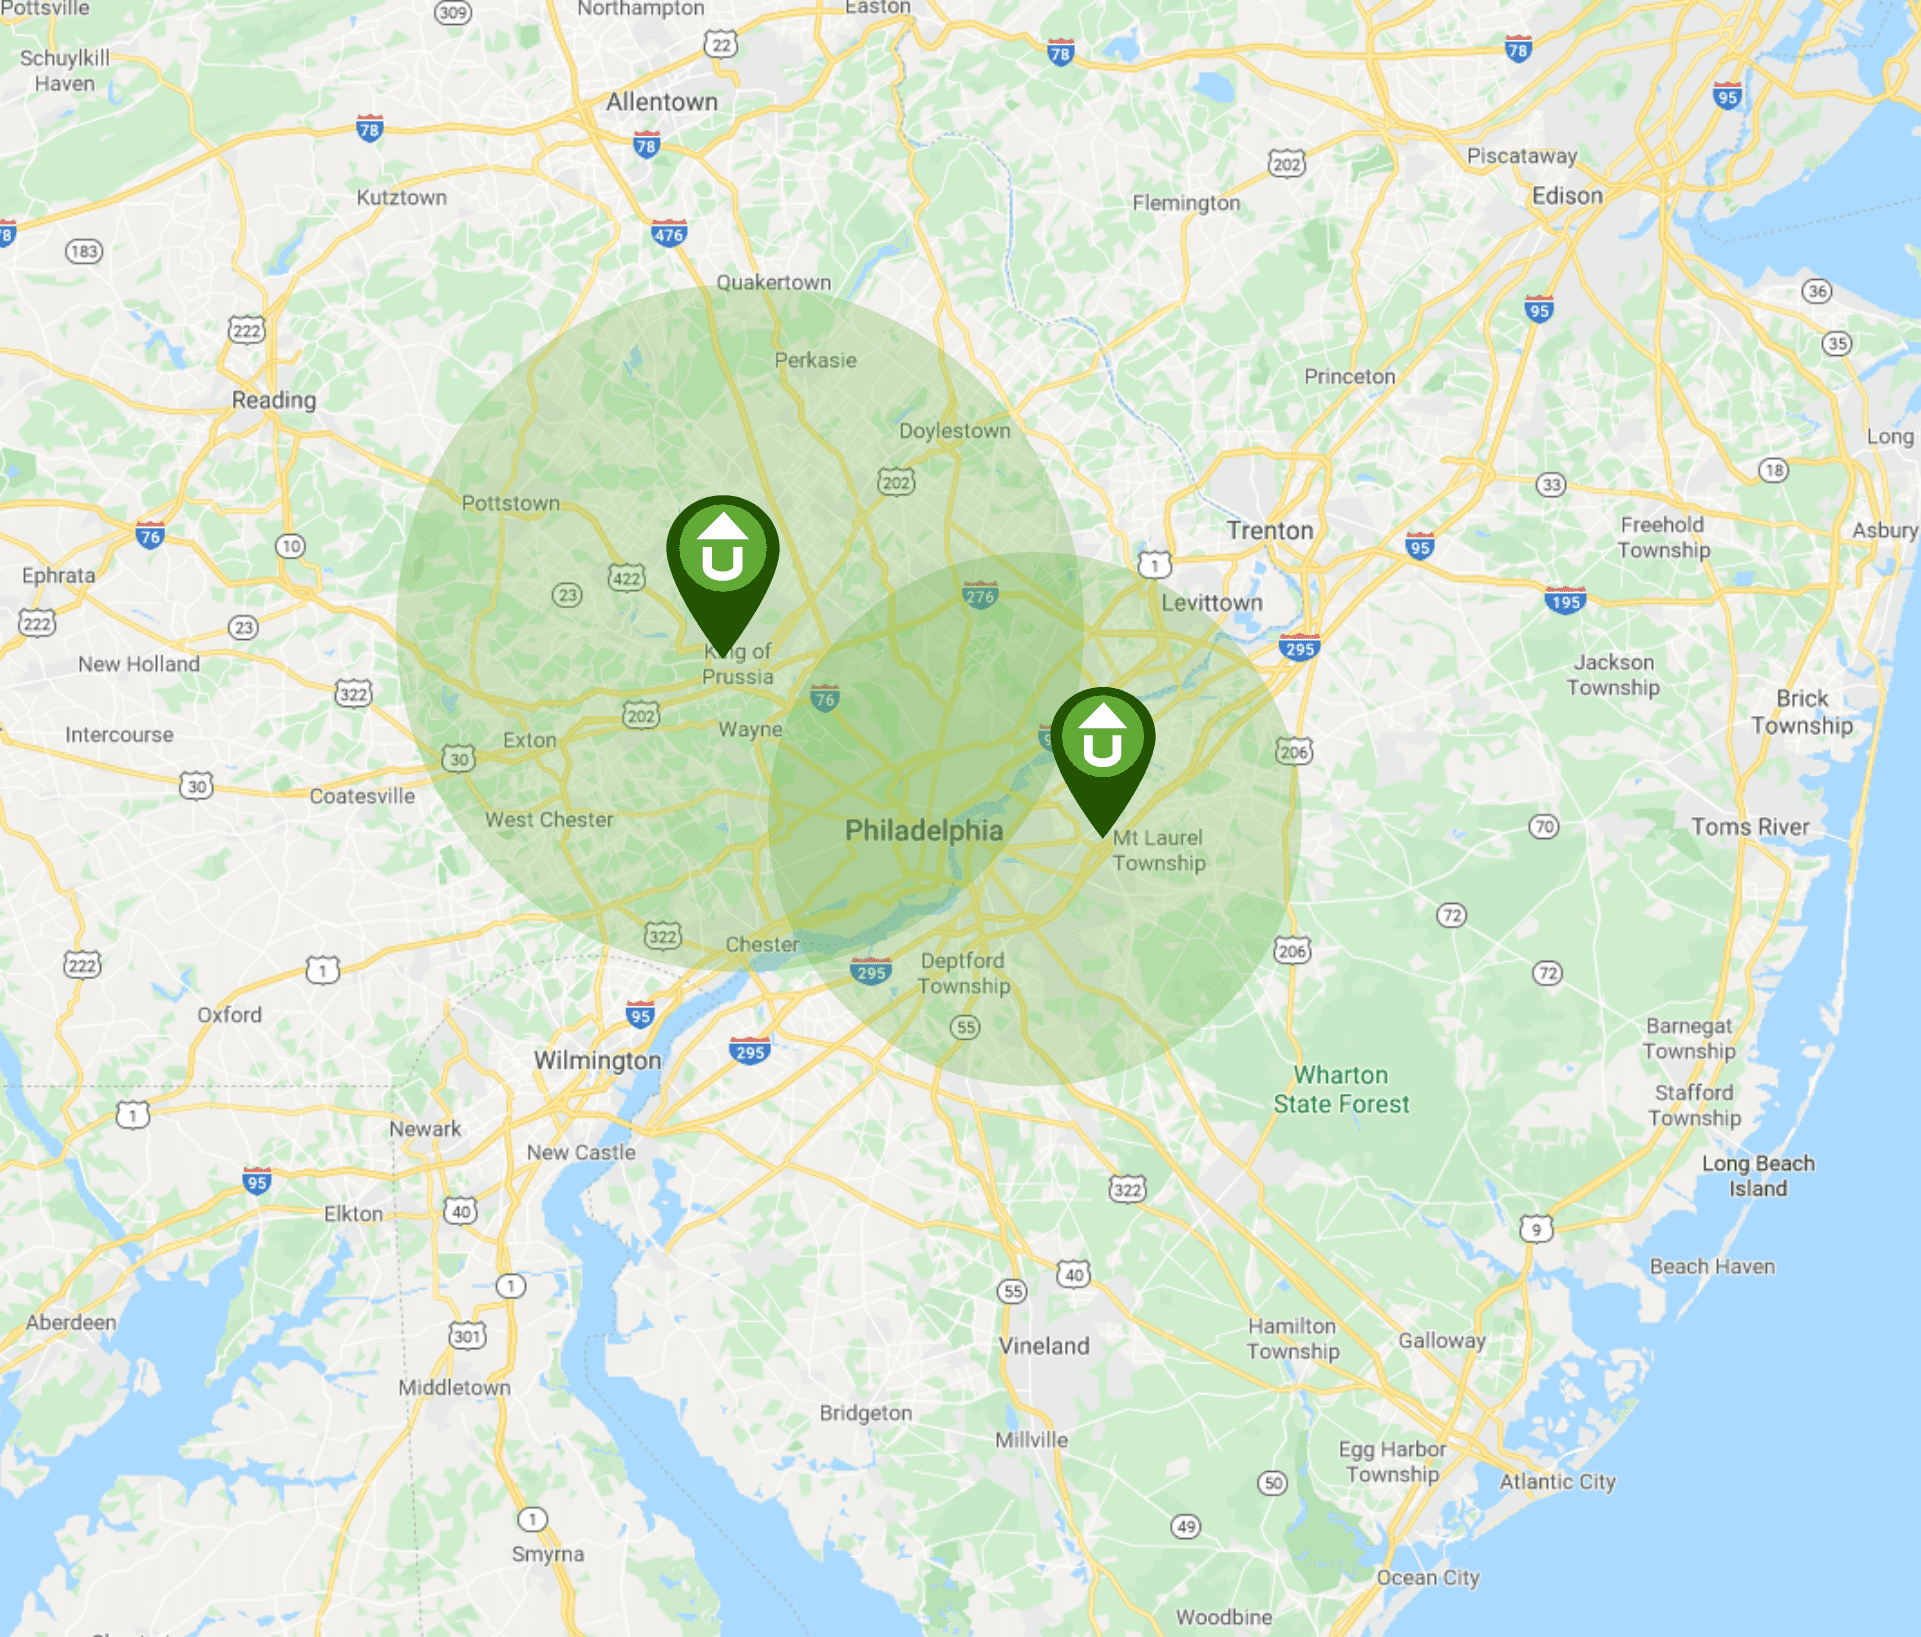 Google Map Image Of Approximate Service Area Coverage Including Pennsylvania and New Jersey.